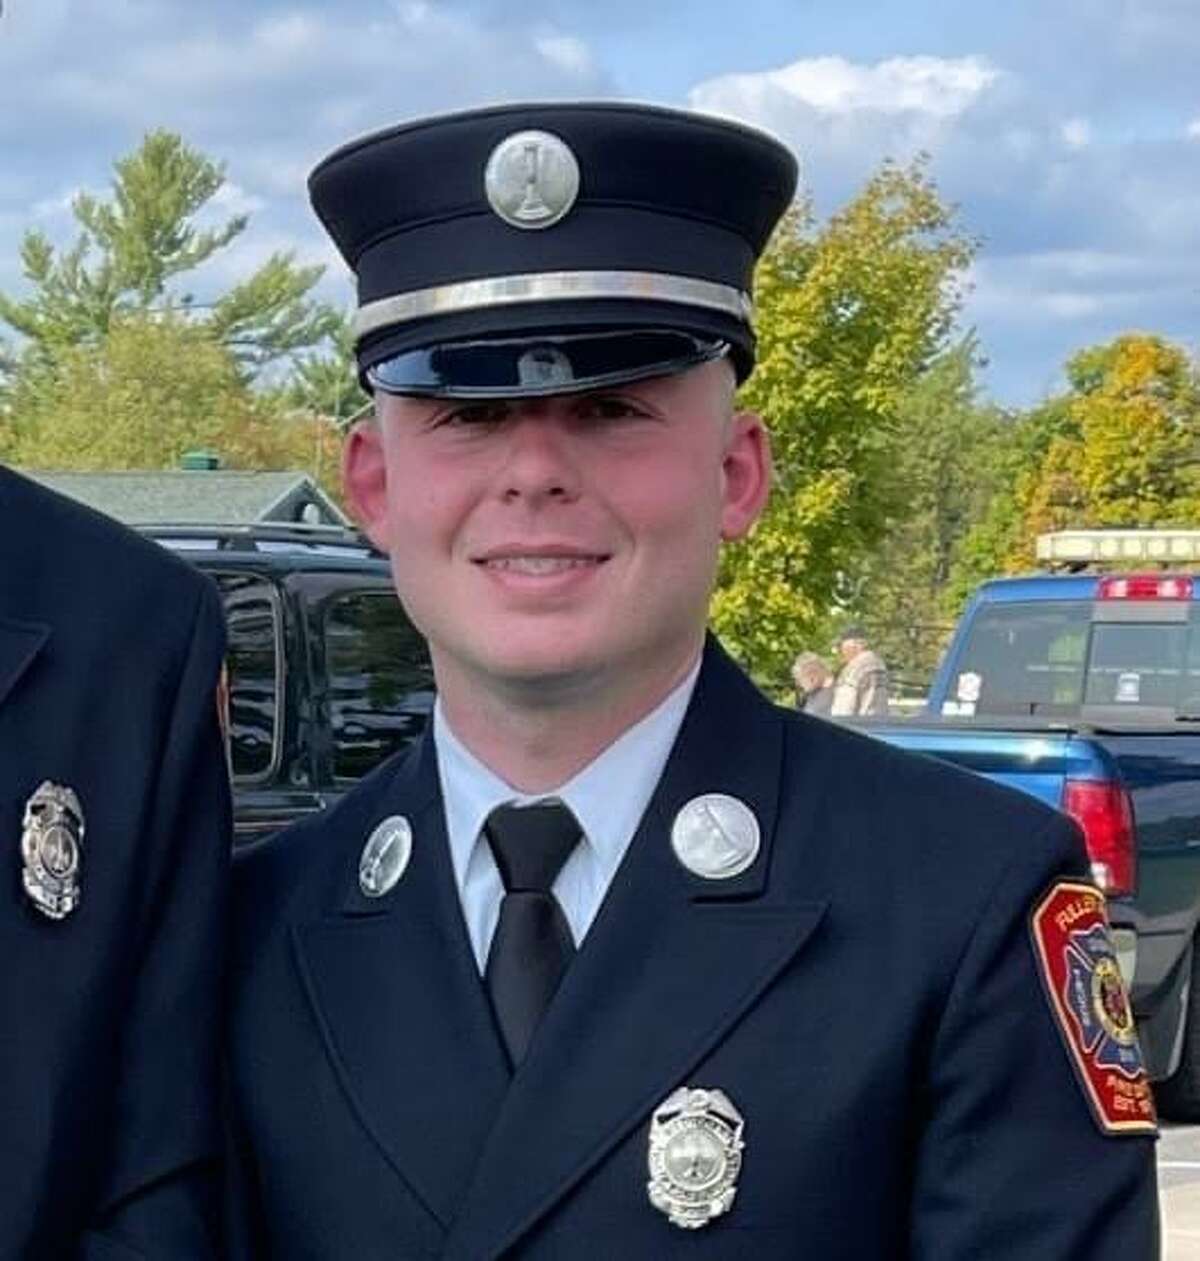 Ryan "Gags" Gagliardi, an EMT and volunteer firefighter, is being honored after his passing.